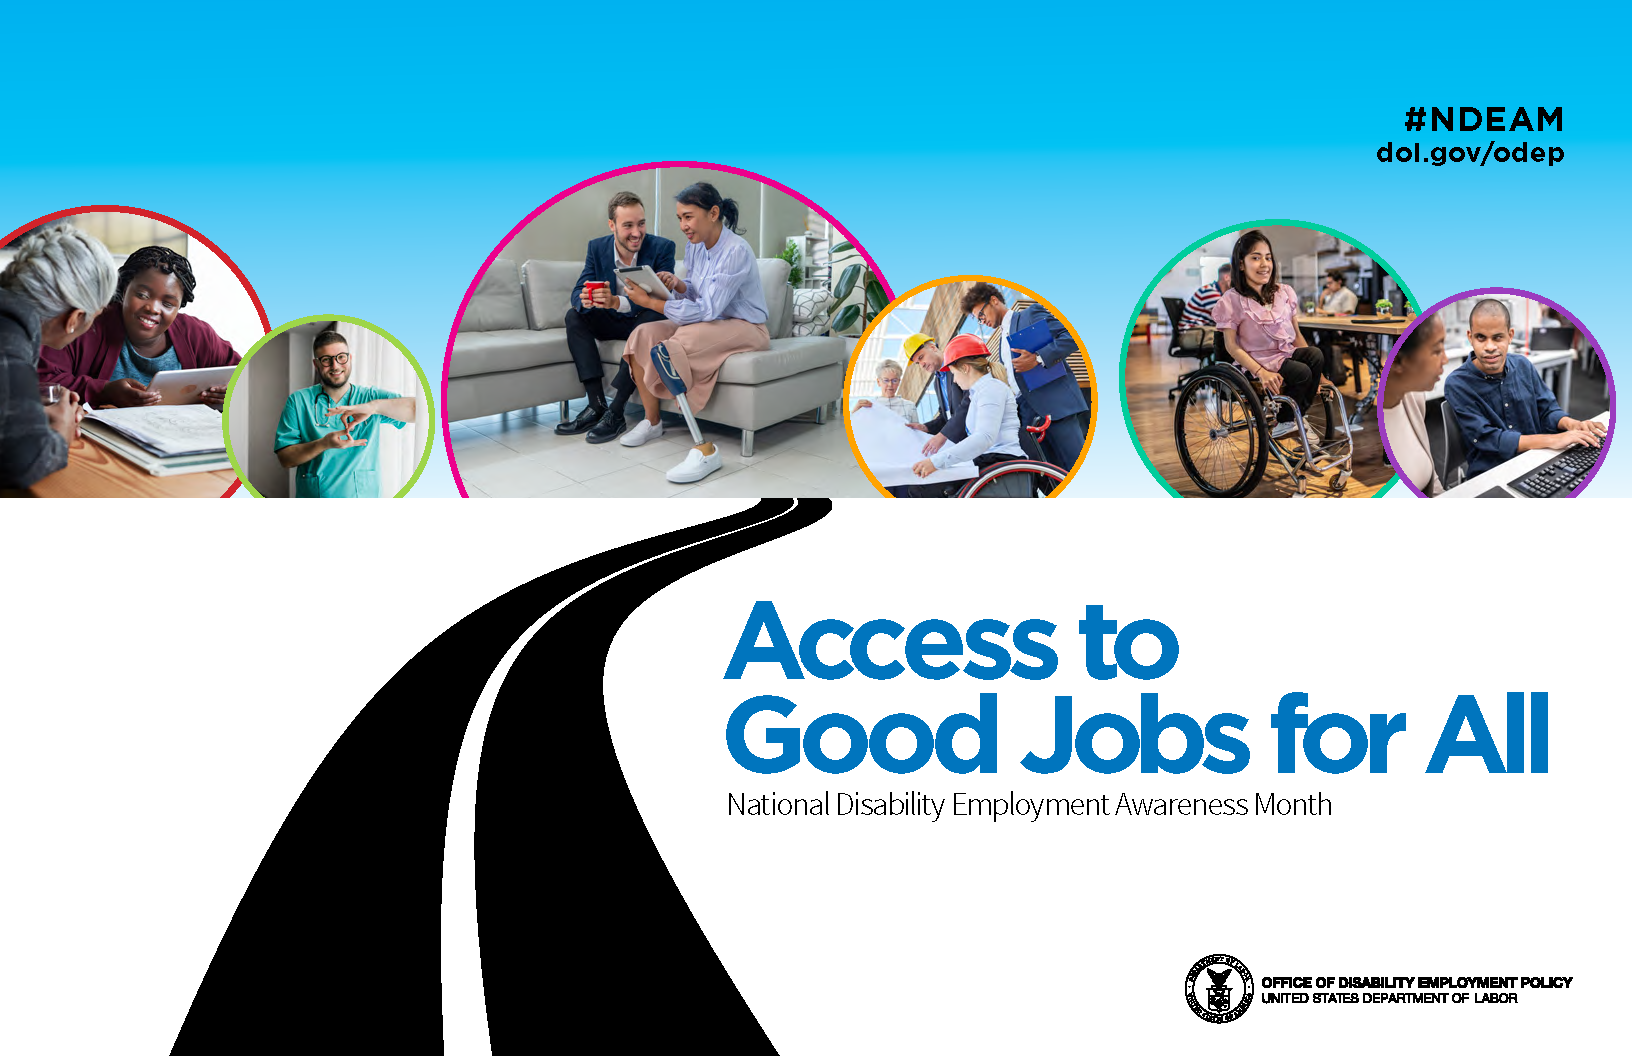 2024 NDEAM poster. Says “Access to Good Jobs for All” and “National Disability Employment Awareness Month.” Also has 6 photos of diverse disabled workers in various workplaces and the DOL seal next to the words “Office of Disability Employment Policy, United States Department of Labor.”